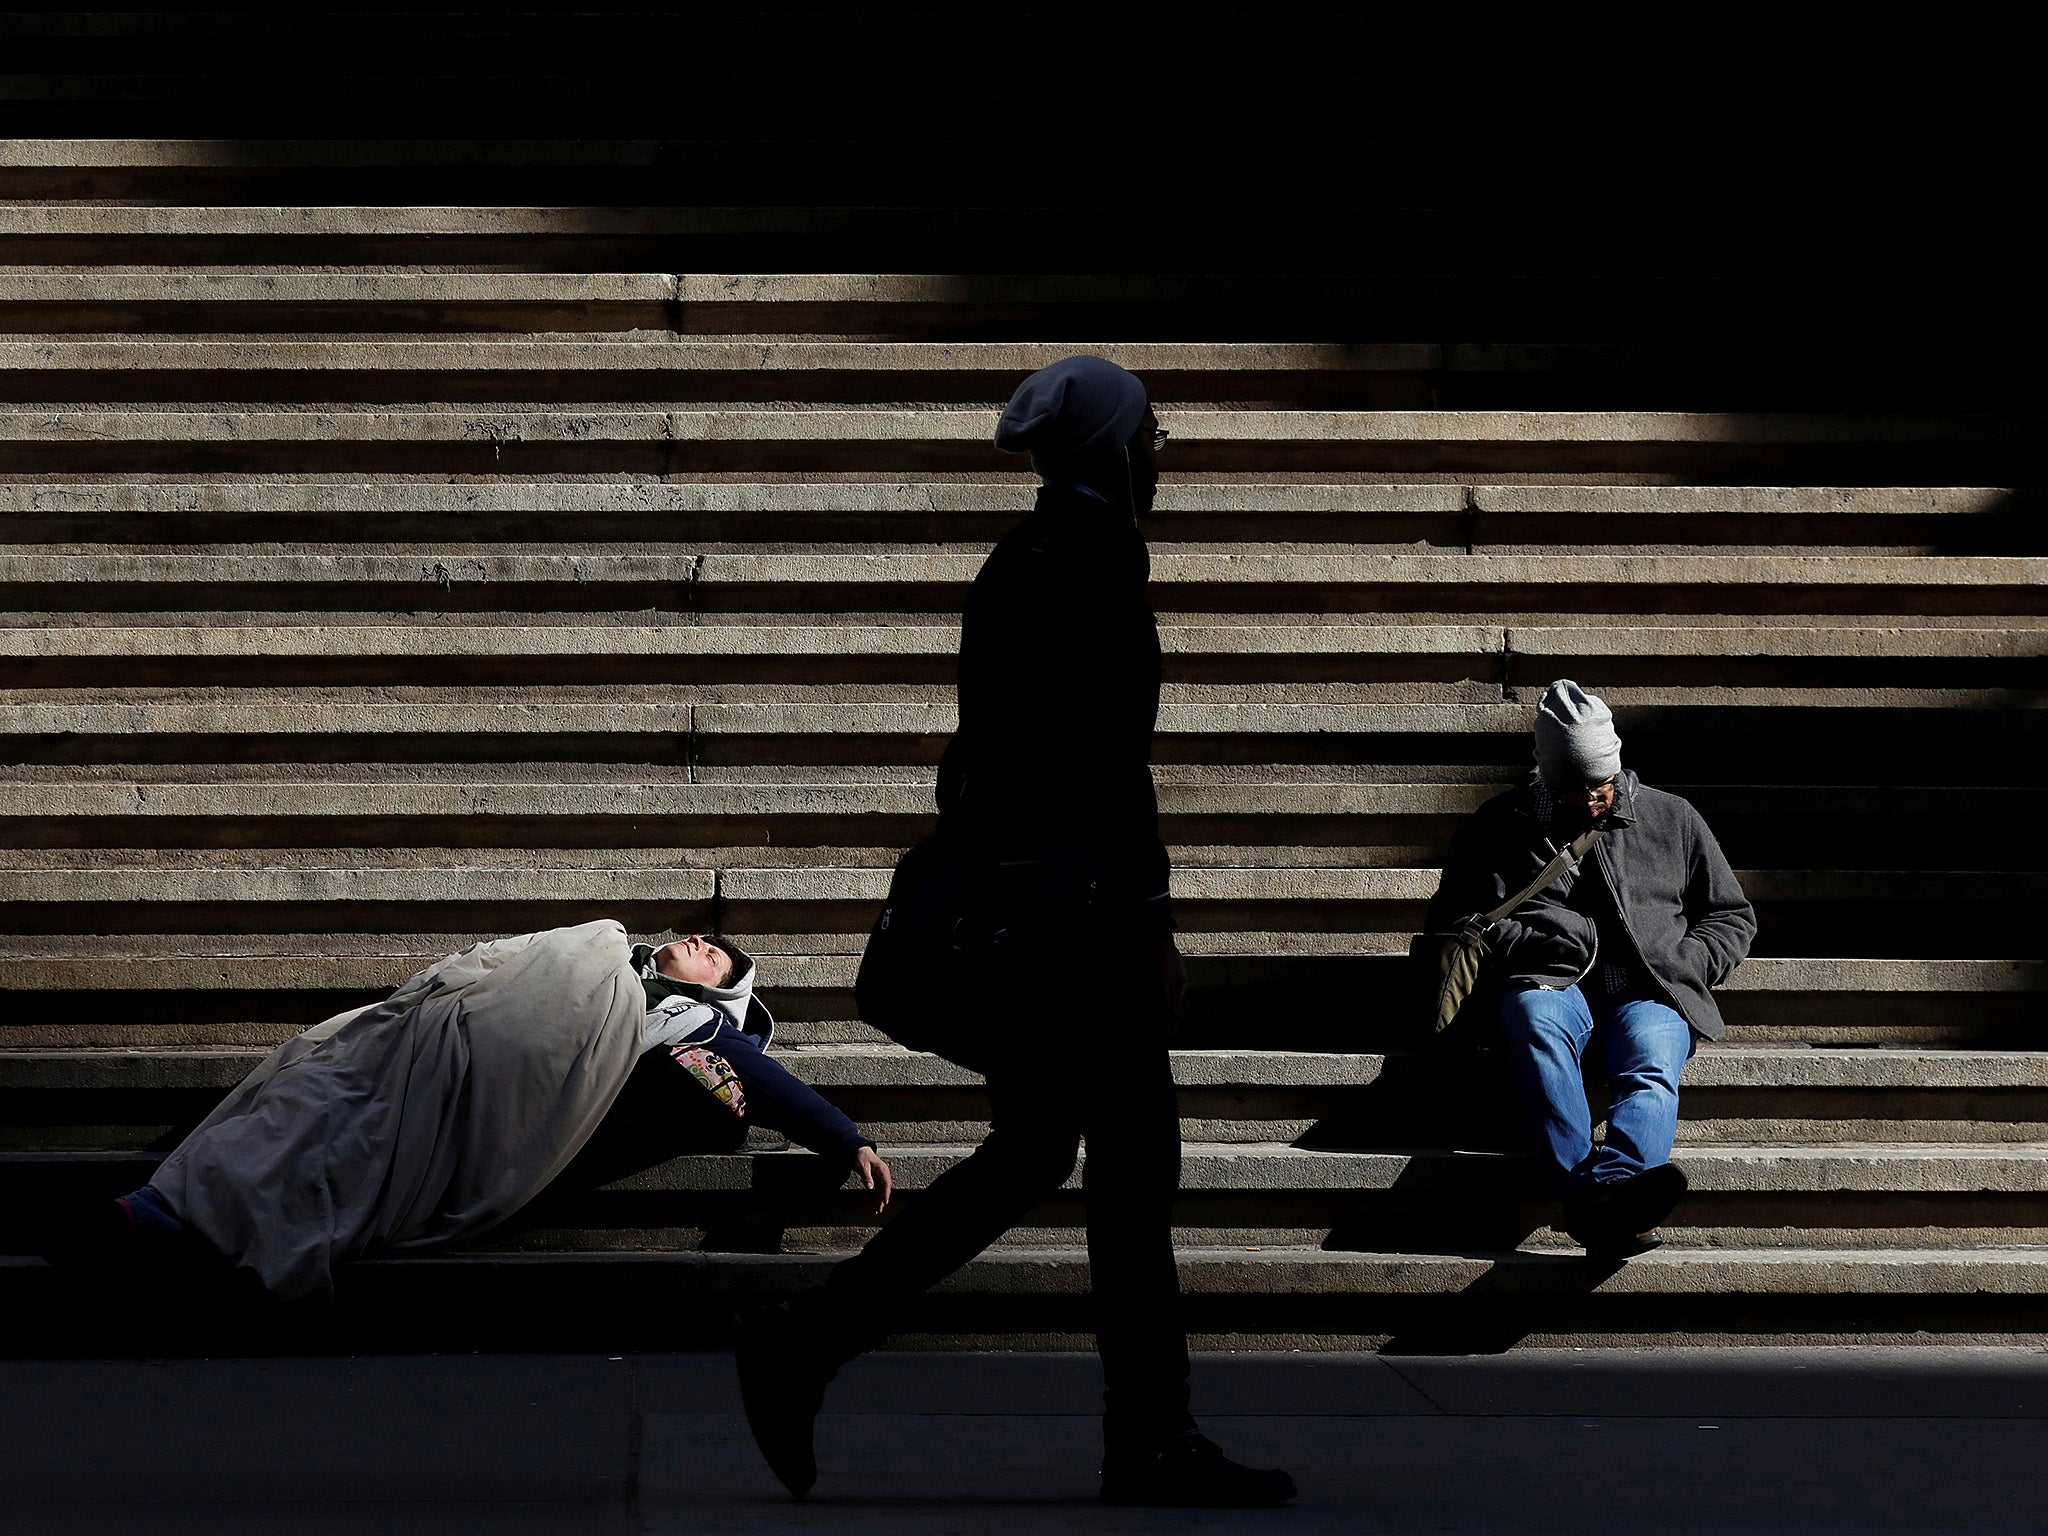 A homeless person sleeps on the steps of Federal Hall in Wall Street